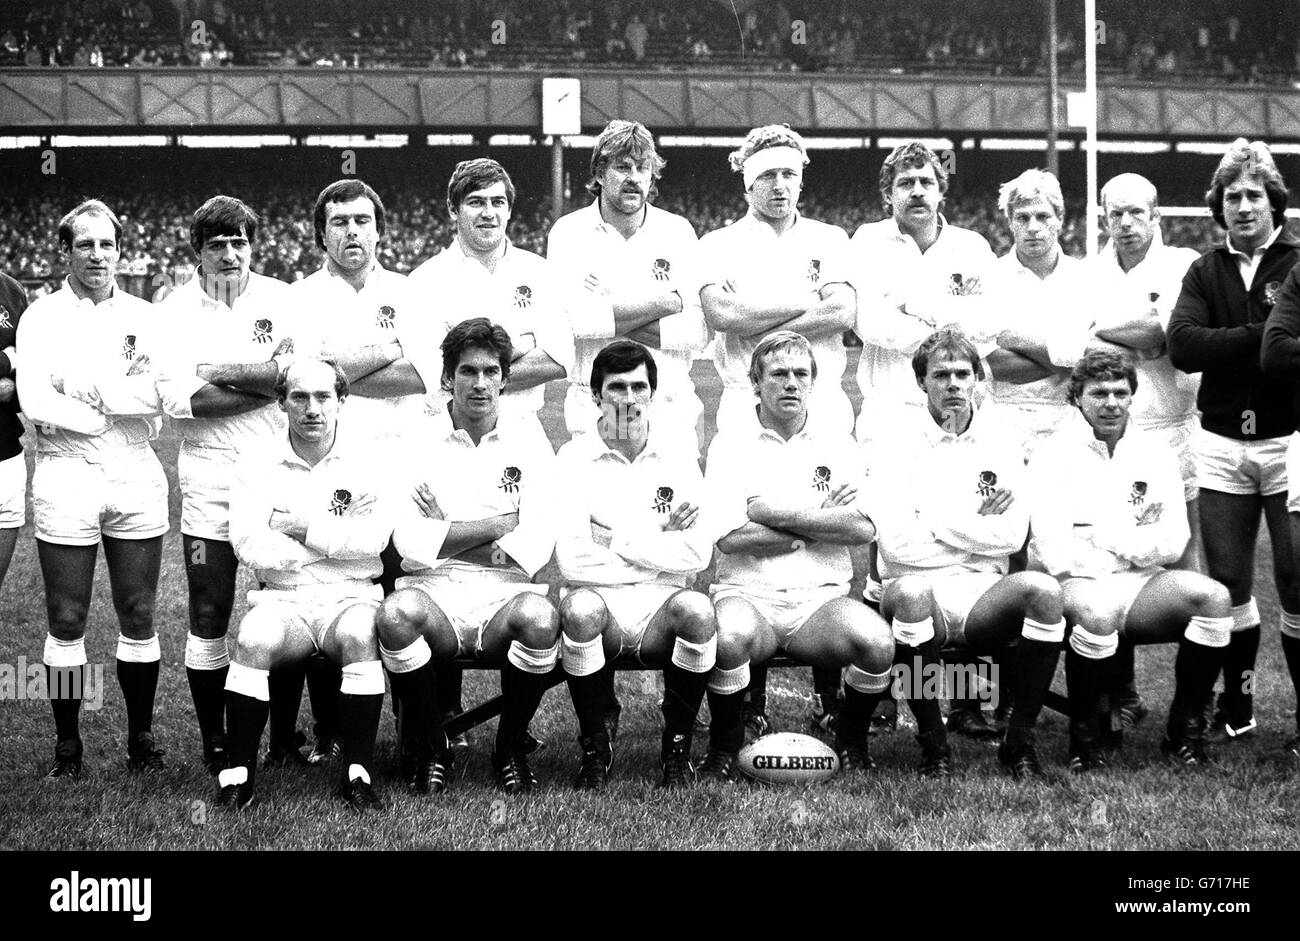 The victorious England Rugby XV who registered an historic 15-9 victory over New Zealand All Blacks at Twickenham - the first time since 1936. Standing (l-r): William Henry 'Dusty' Hare, Nicholas Gerald Youngs, Gary Stephen Pearce, Paul Donald Simpson, Stephen Bainbridge, Maurice John Colclough, John Philip Scott, Peter James Winterbottom, Colin White and Nick Stringer. Seated (l-r): Leslie Cusworth, Paul William Dodge, Michael Anthony Slemen, Peter John Wheeler, Clive Woodward and John Carleton. Stock Photo